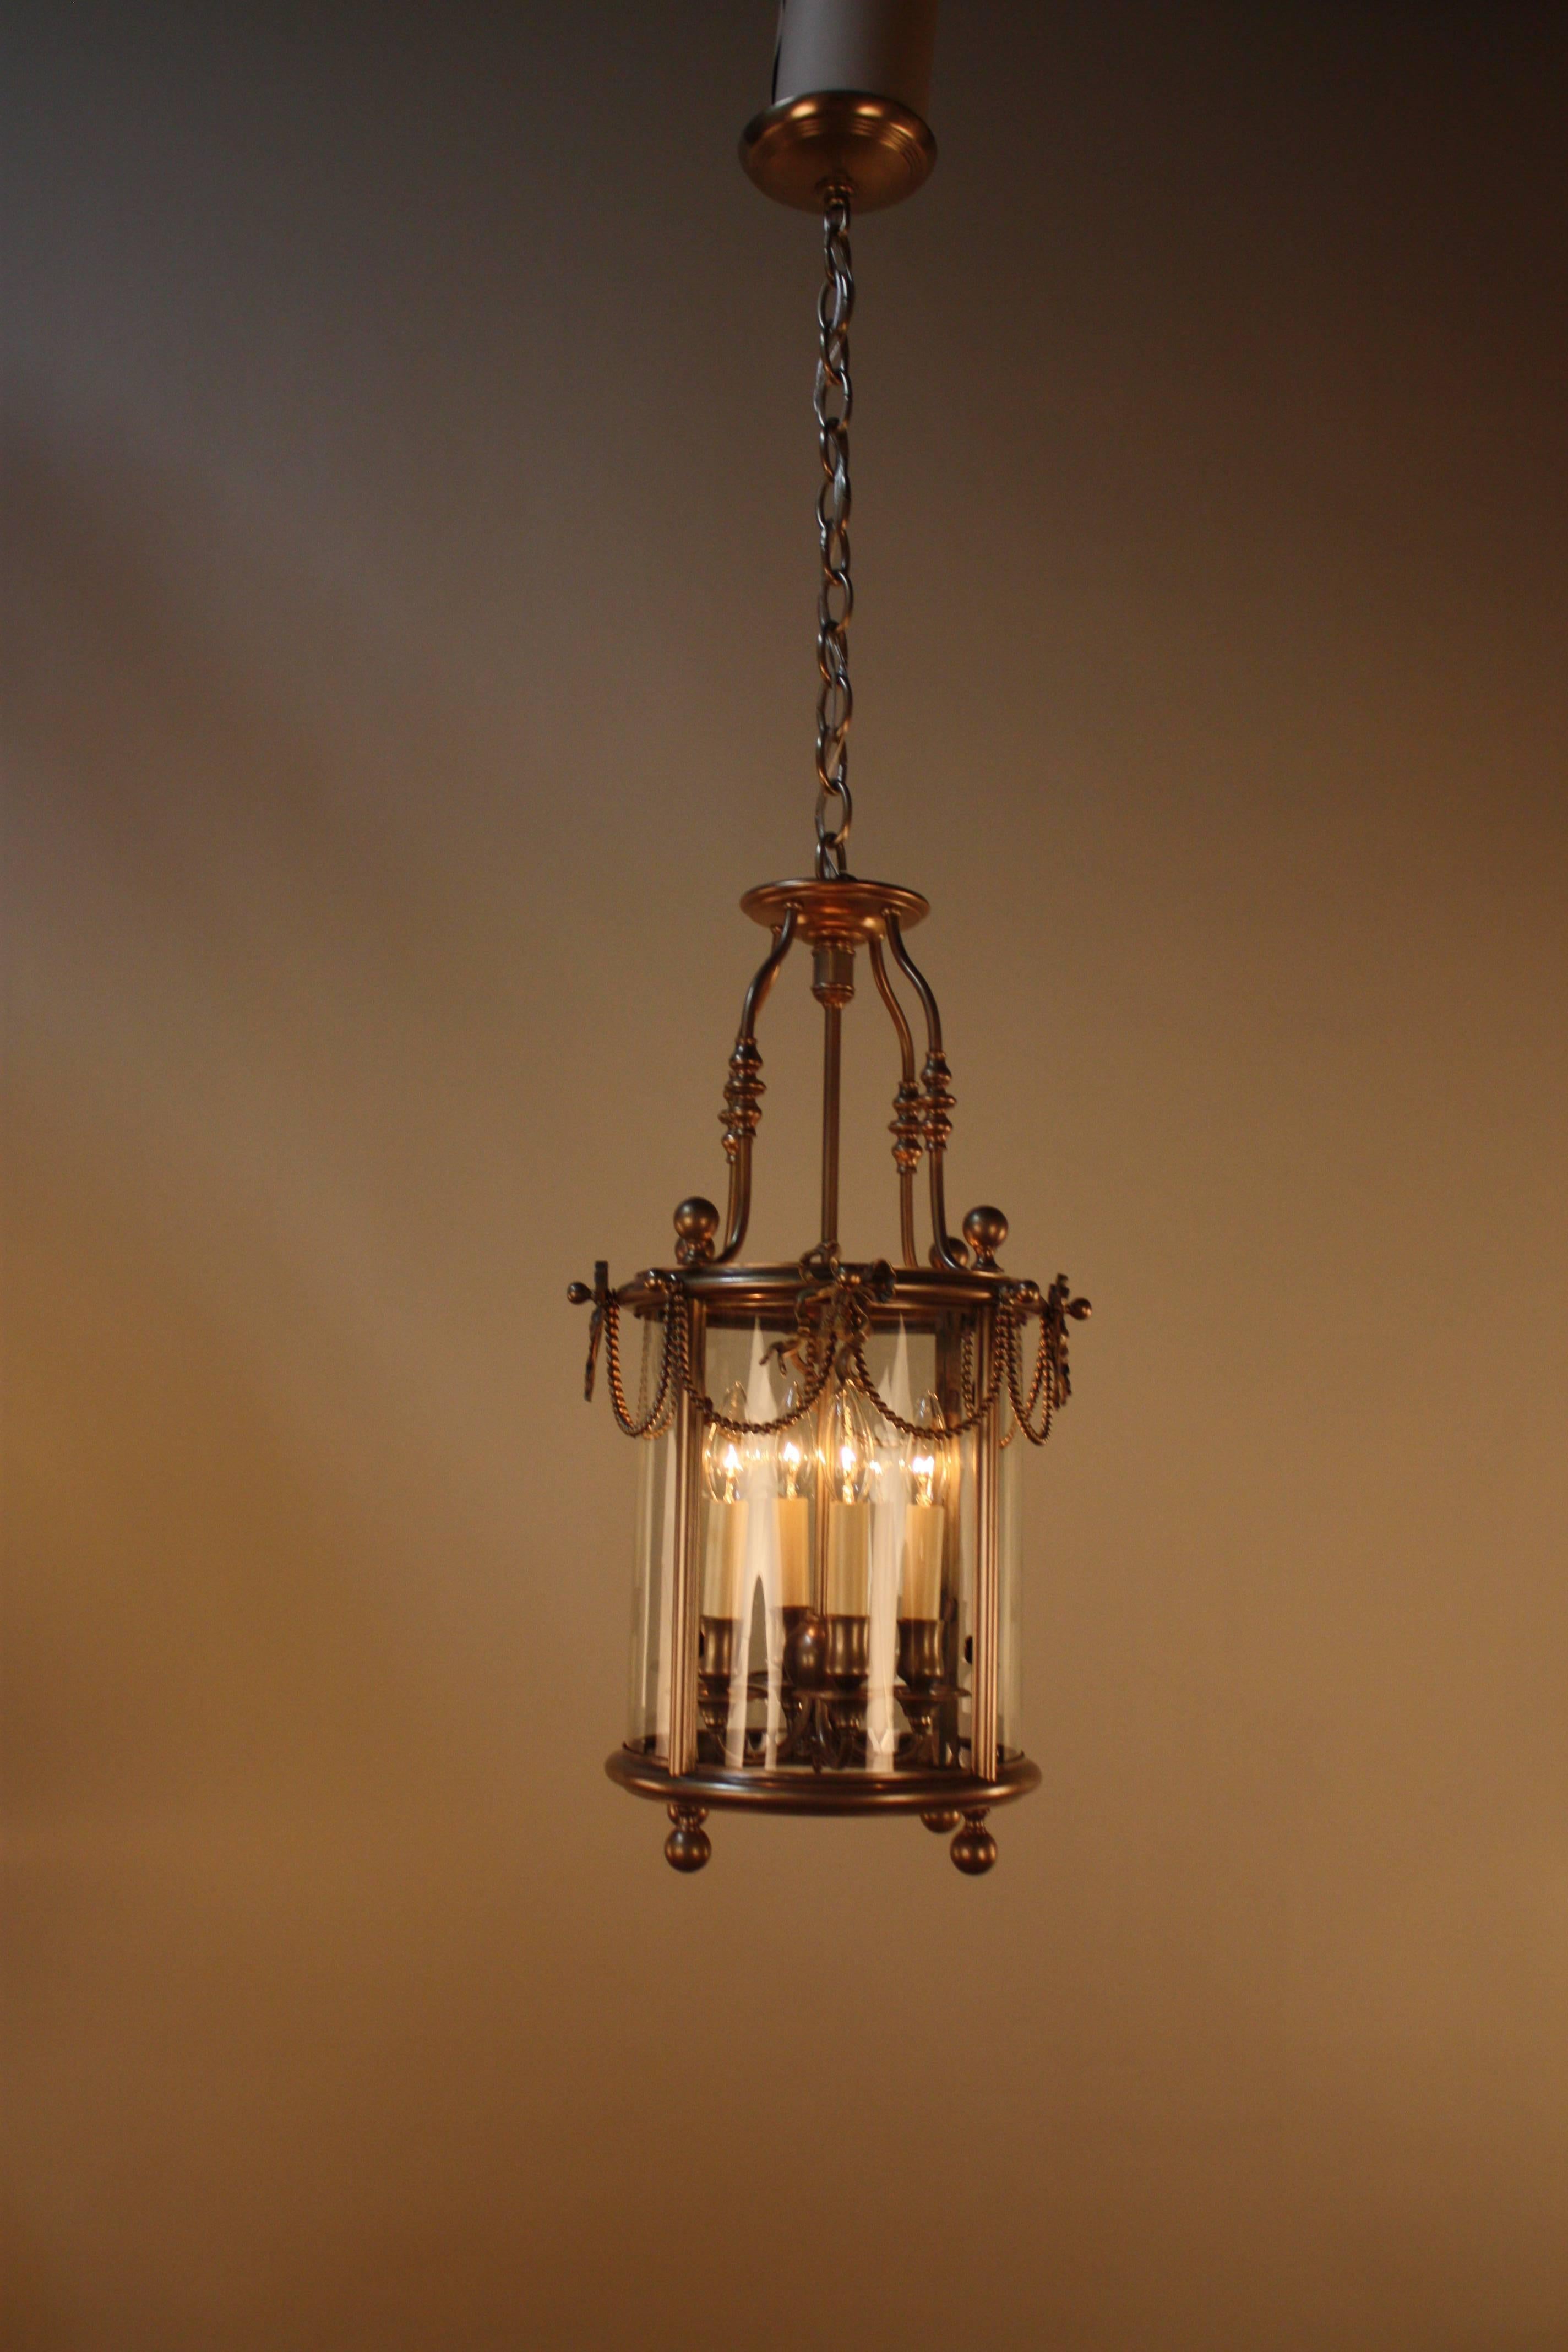 Anodized Early 20th Century French Bronze Lantern